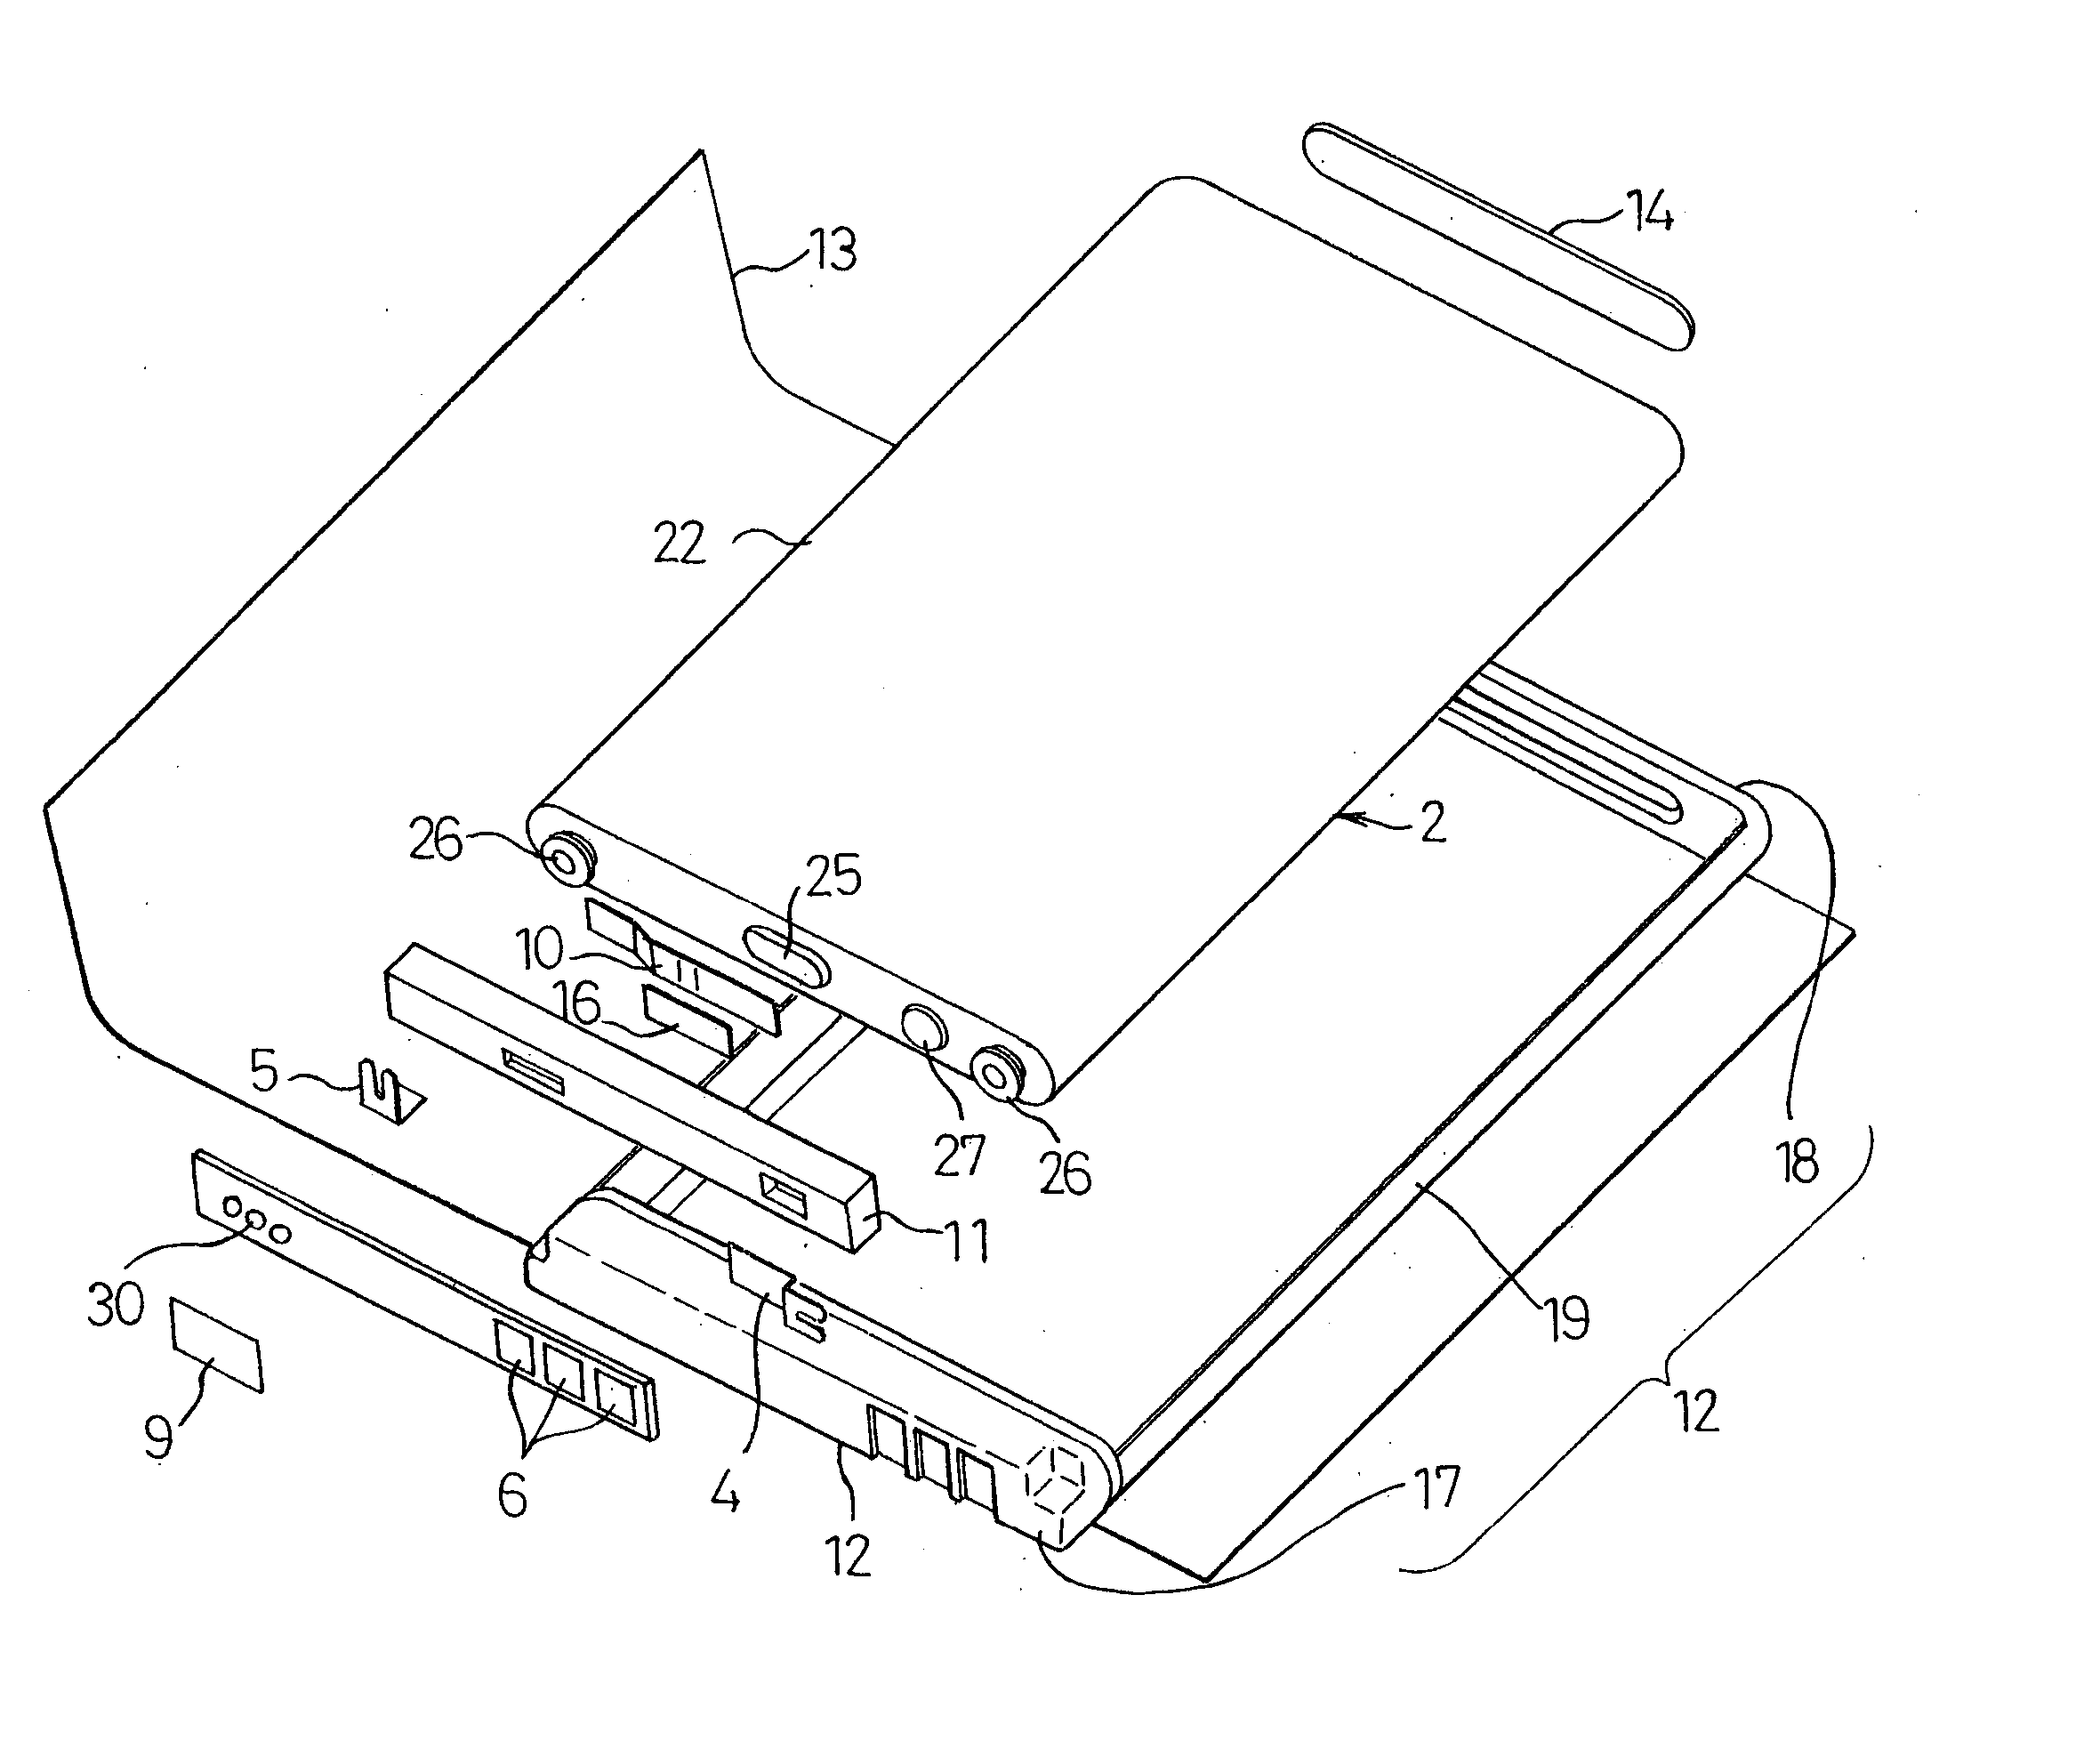 Battery pack manufacturing method